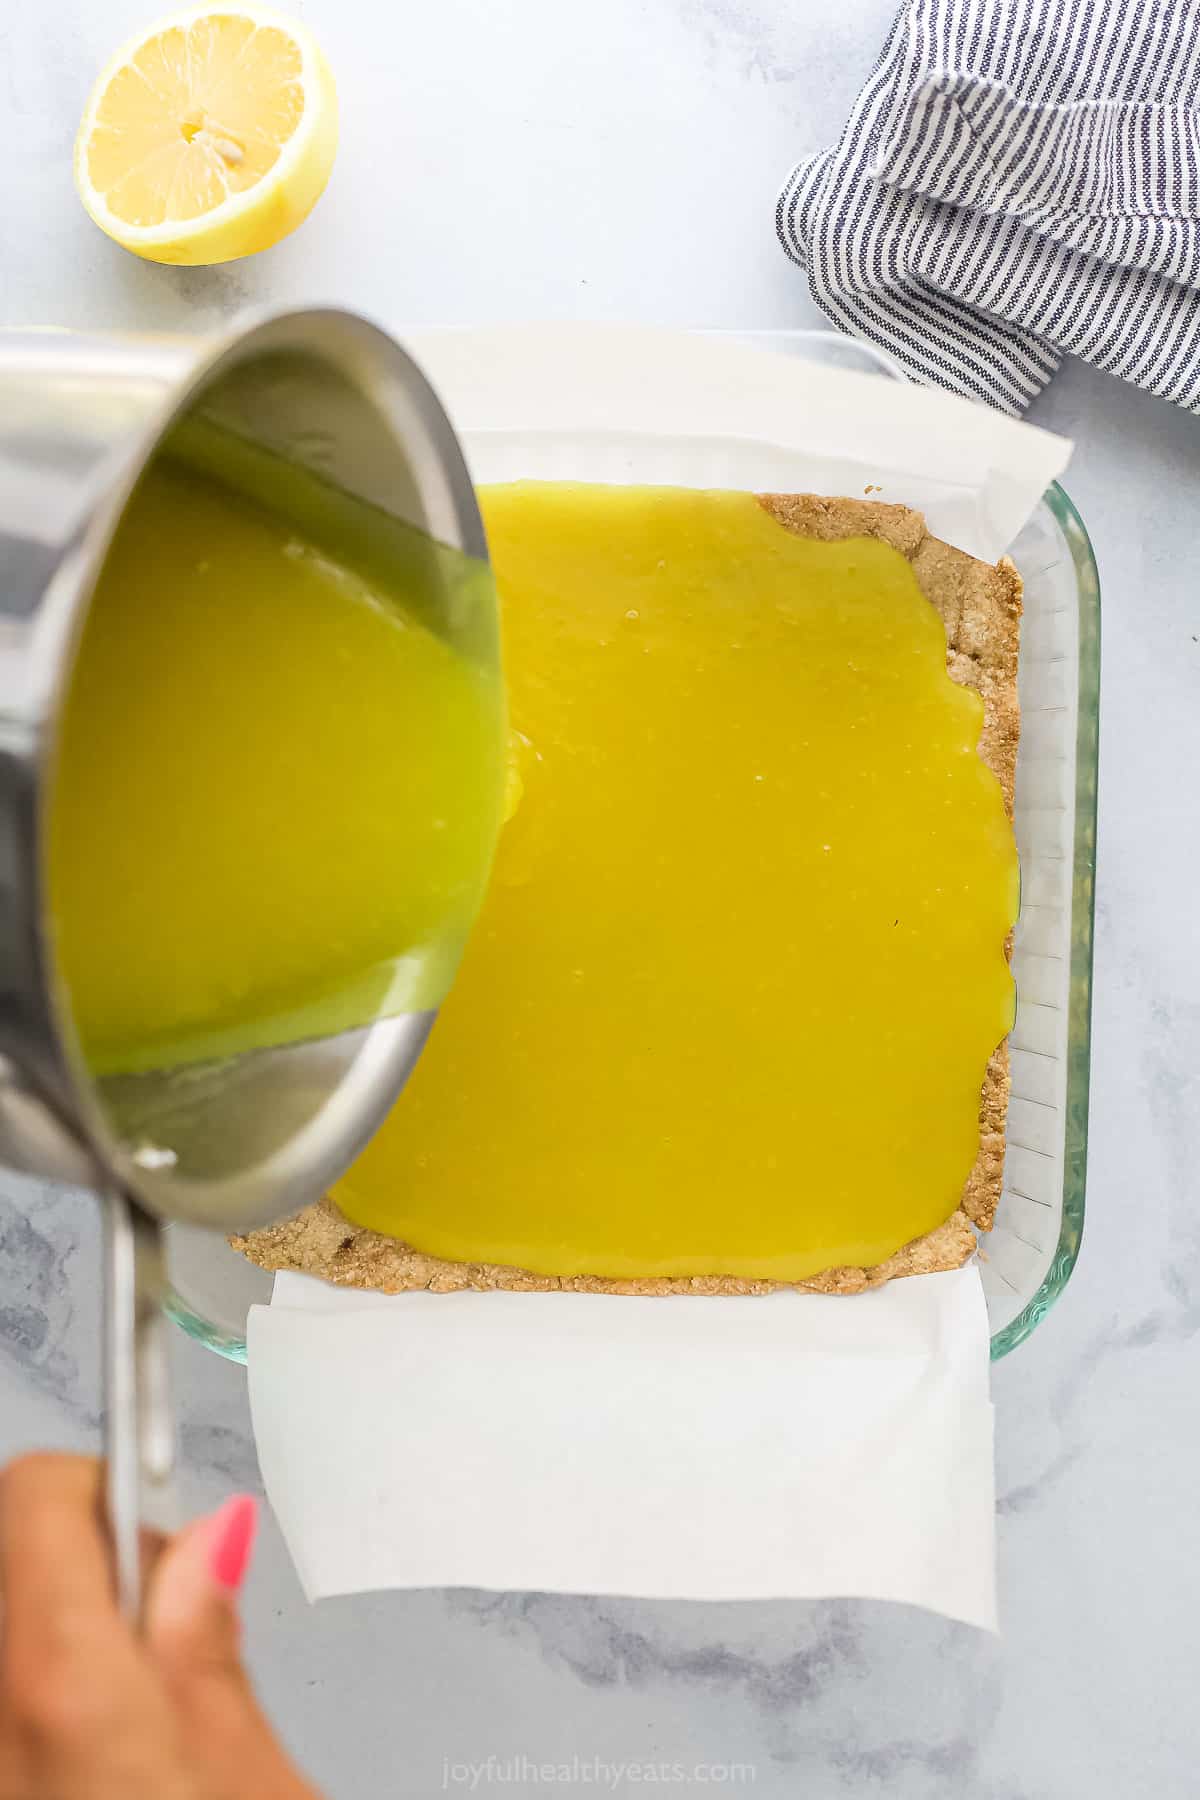 Lemon curd filling being poured over a maple almond crust in a glass baking dish